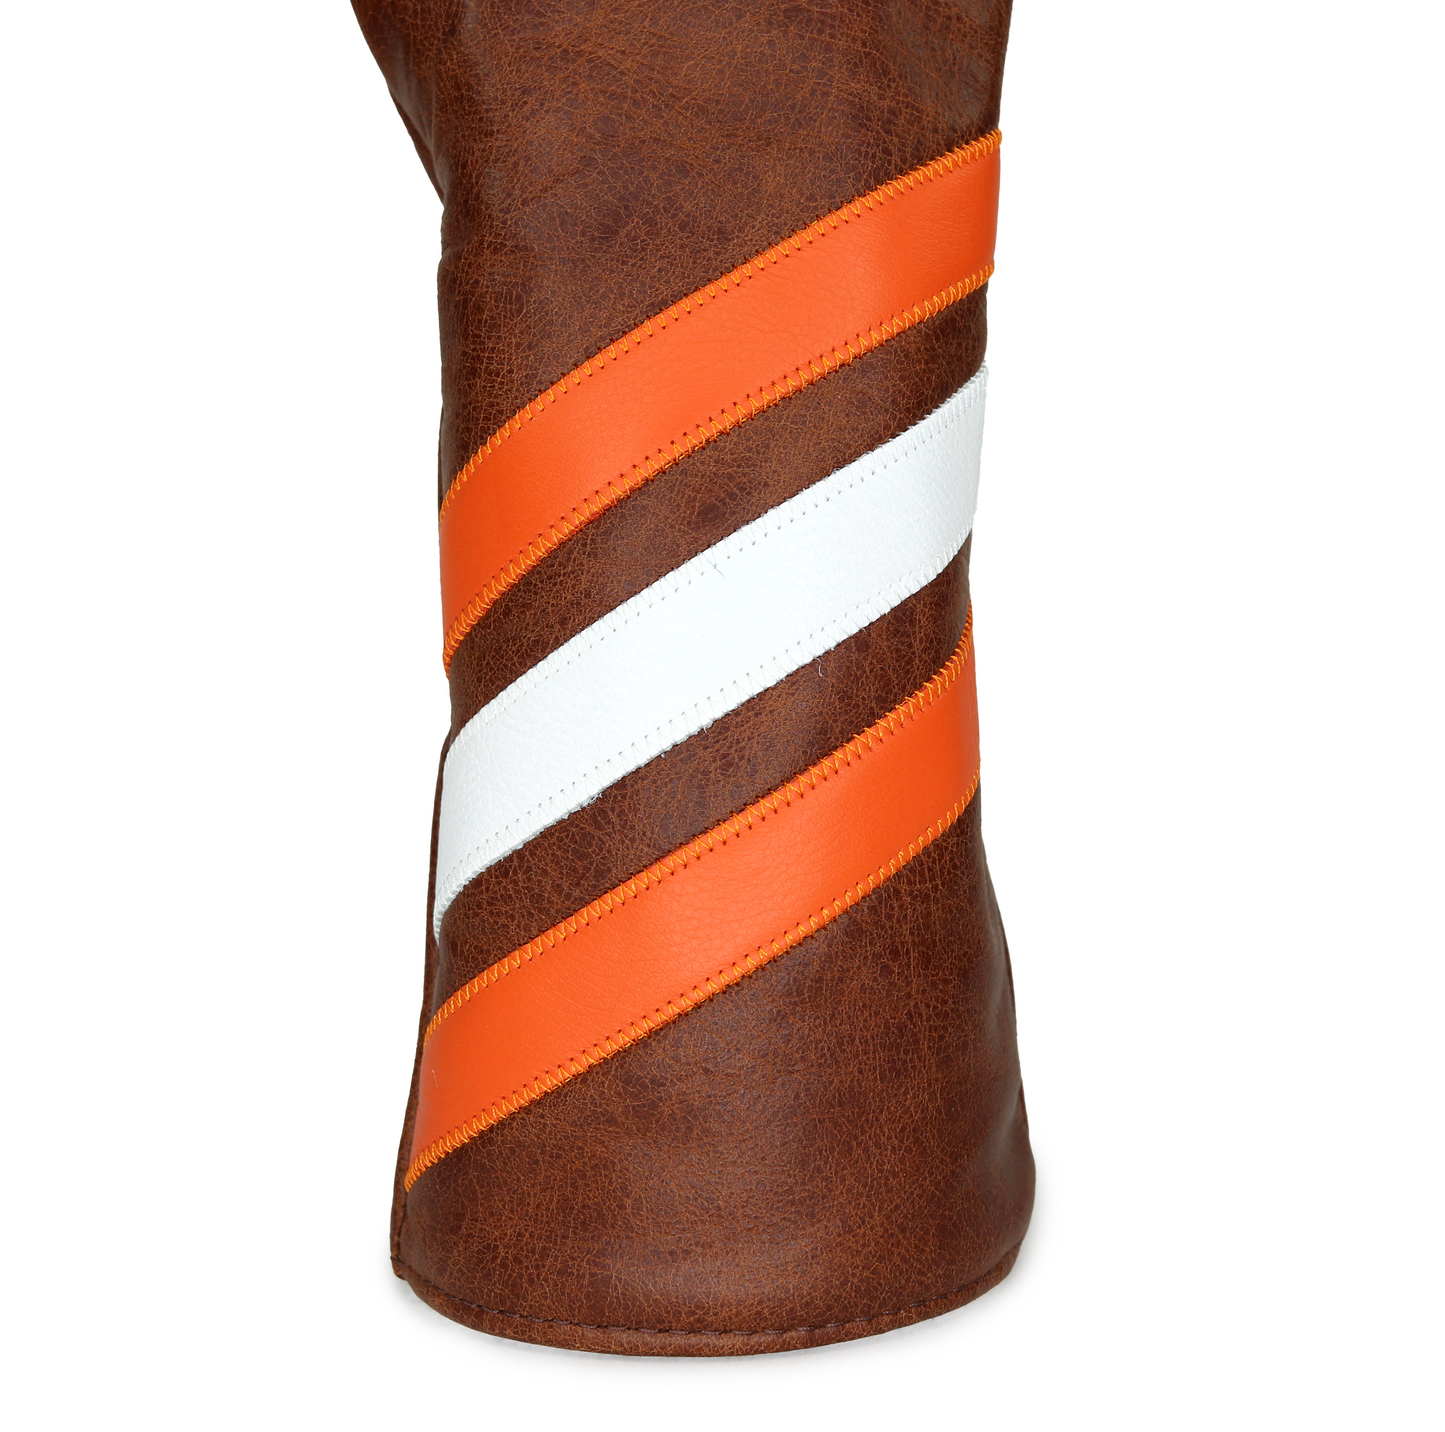 
                  
                    Tennessee Classic Leather Fairway Wood Cover
                  
                